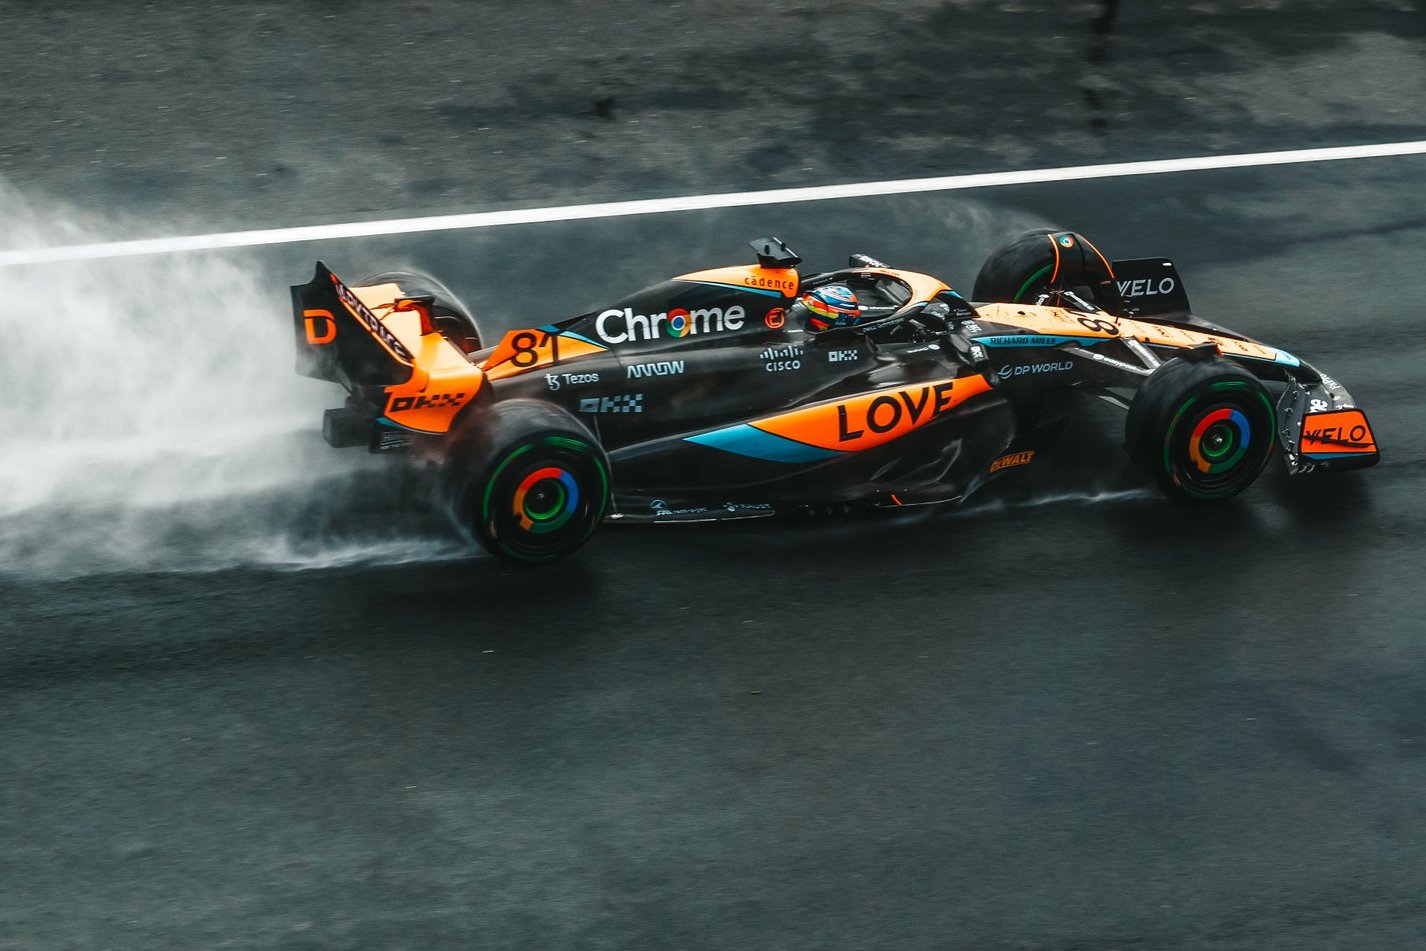 McLaren rookie Piastri celebrates first points at 'crazy' home race